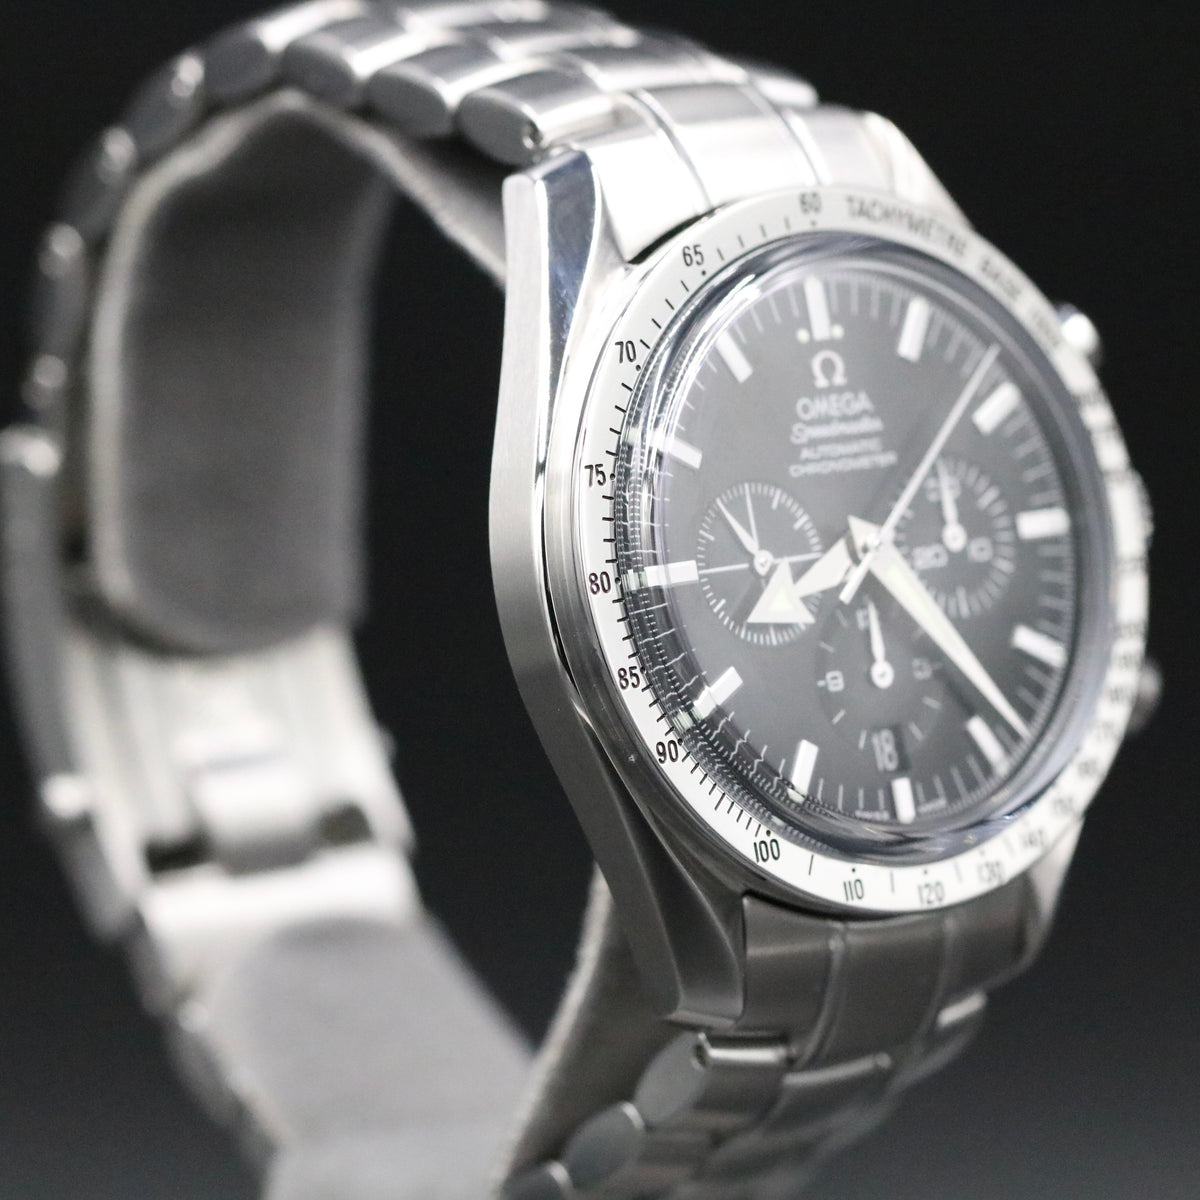 Omega 3551.50 Speedmaster Broad Arrow with Papers